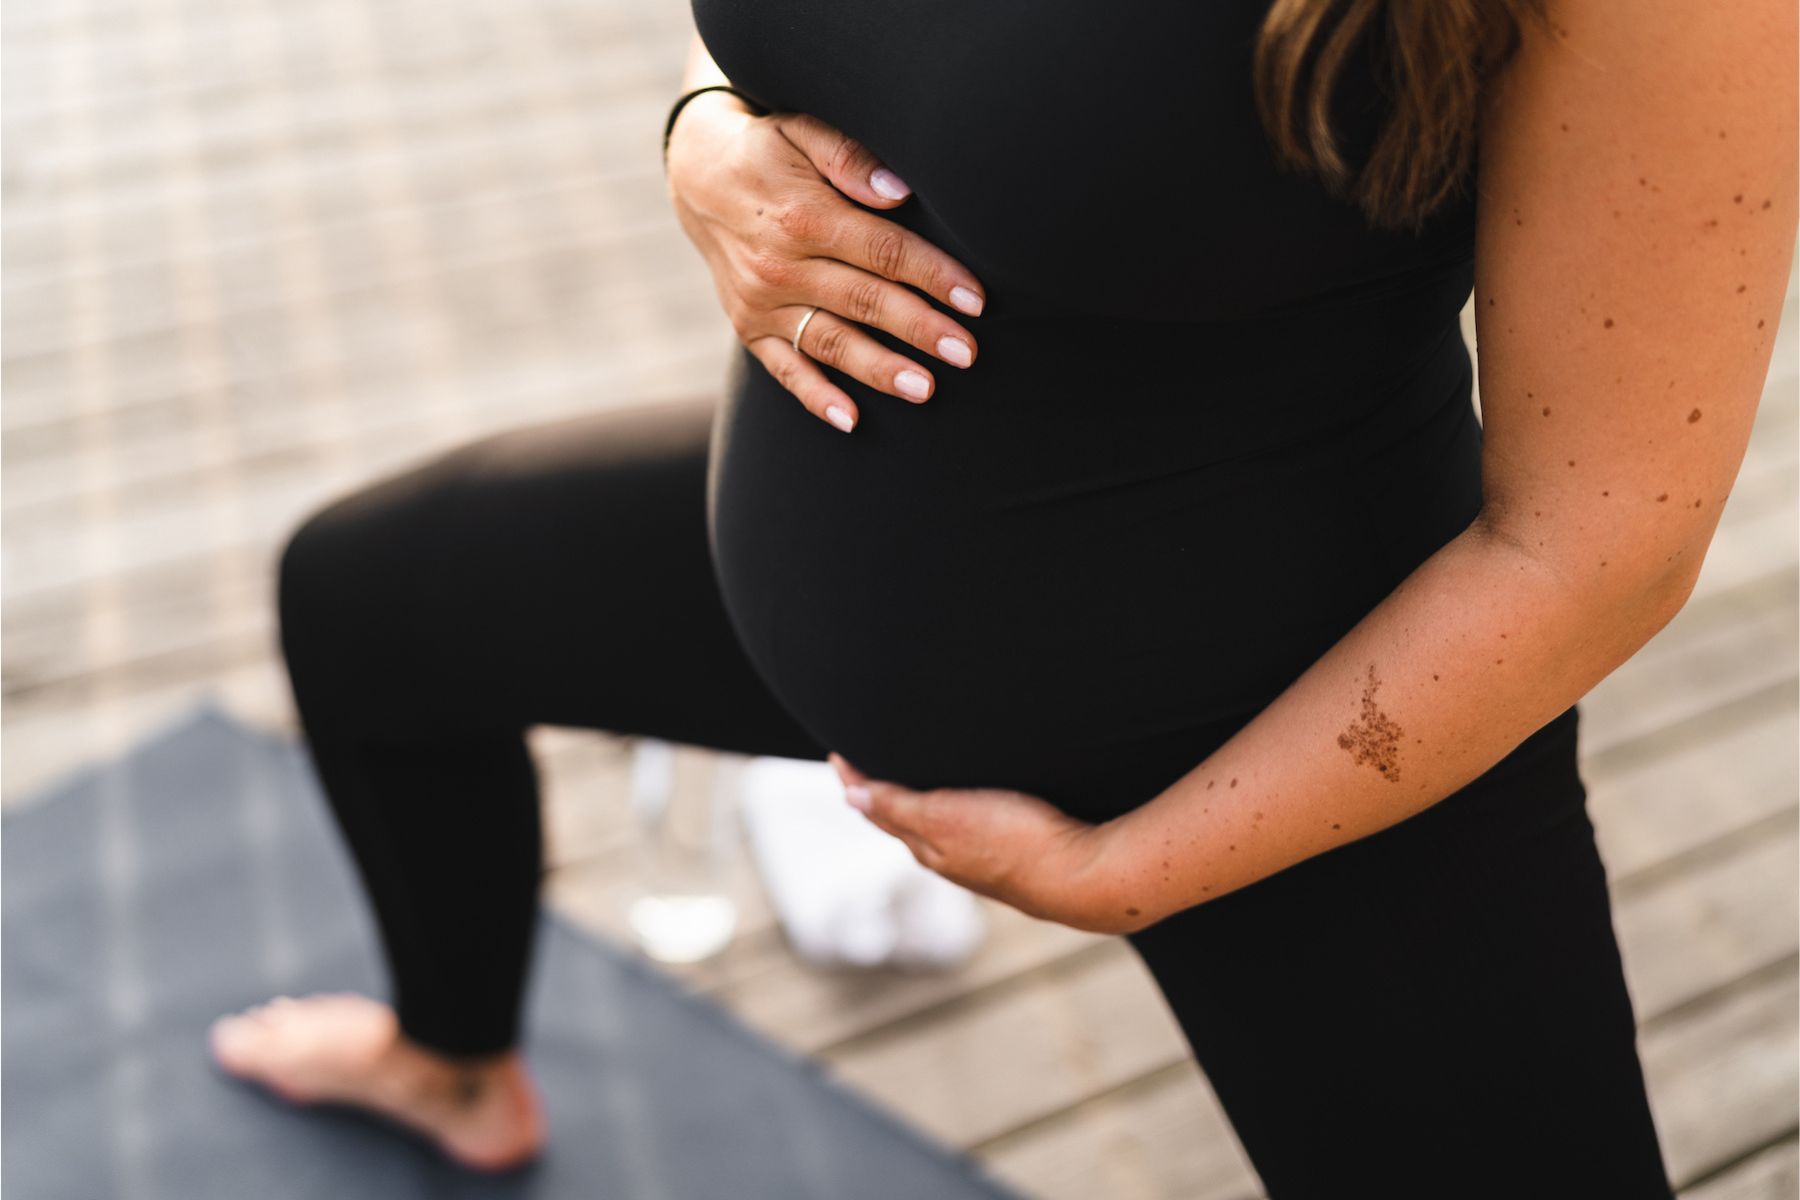 Prenatal Yoga: All You Ever Wanted to Know